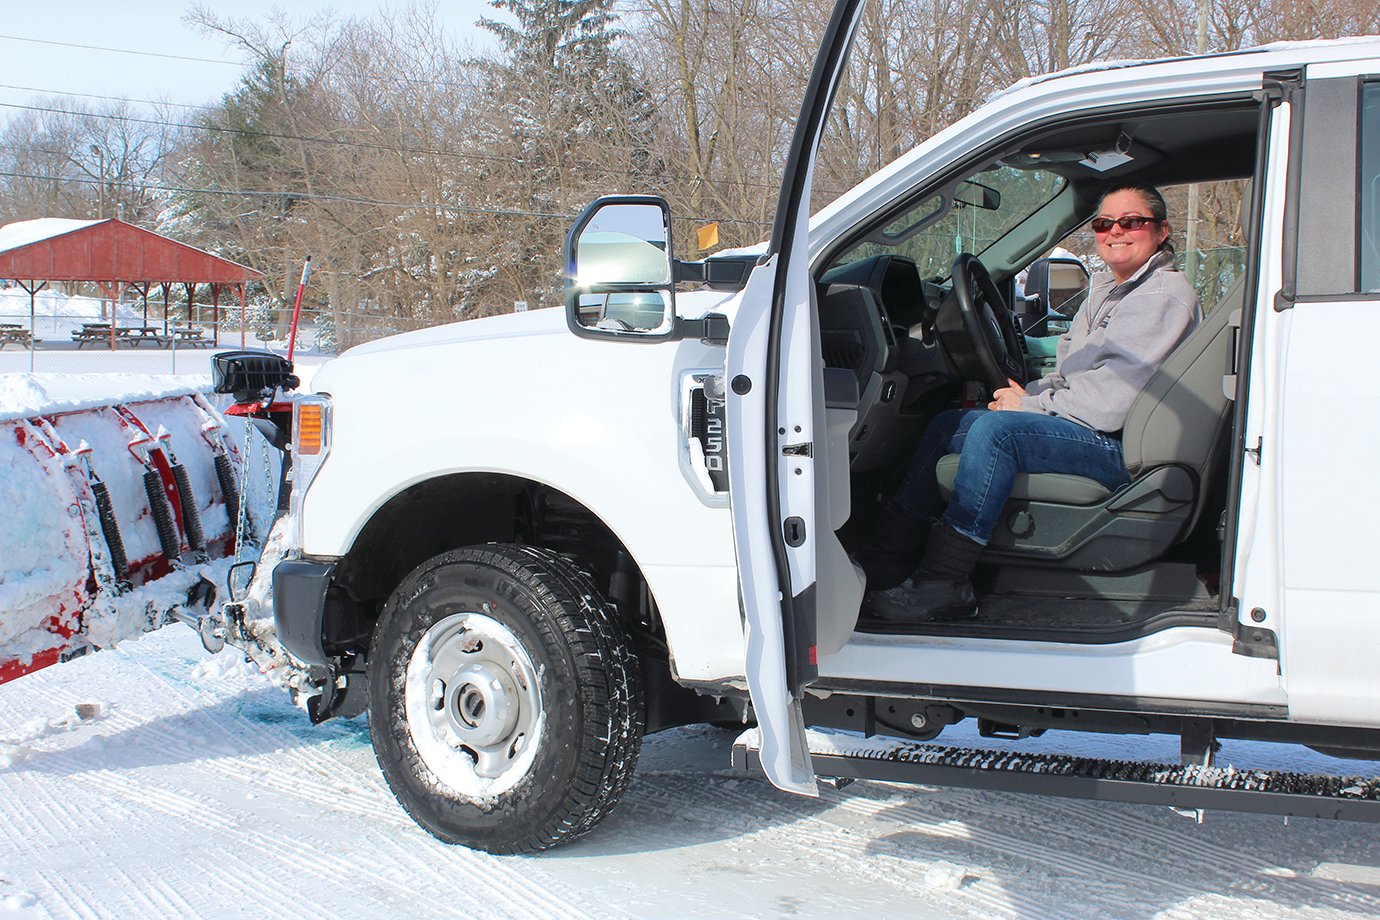 Kim Caldwell with the Parks and Rec Department plows the community center parking lot Friday.